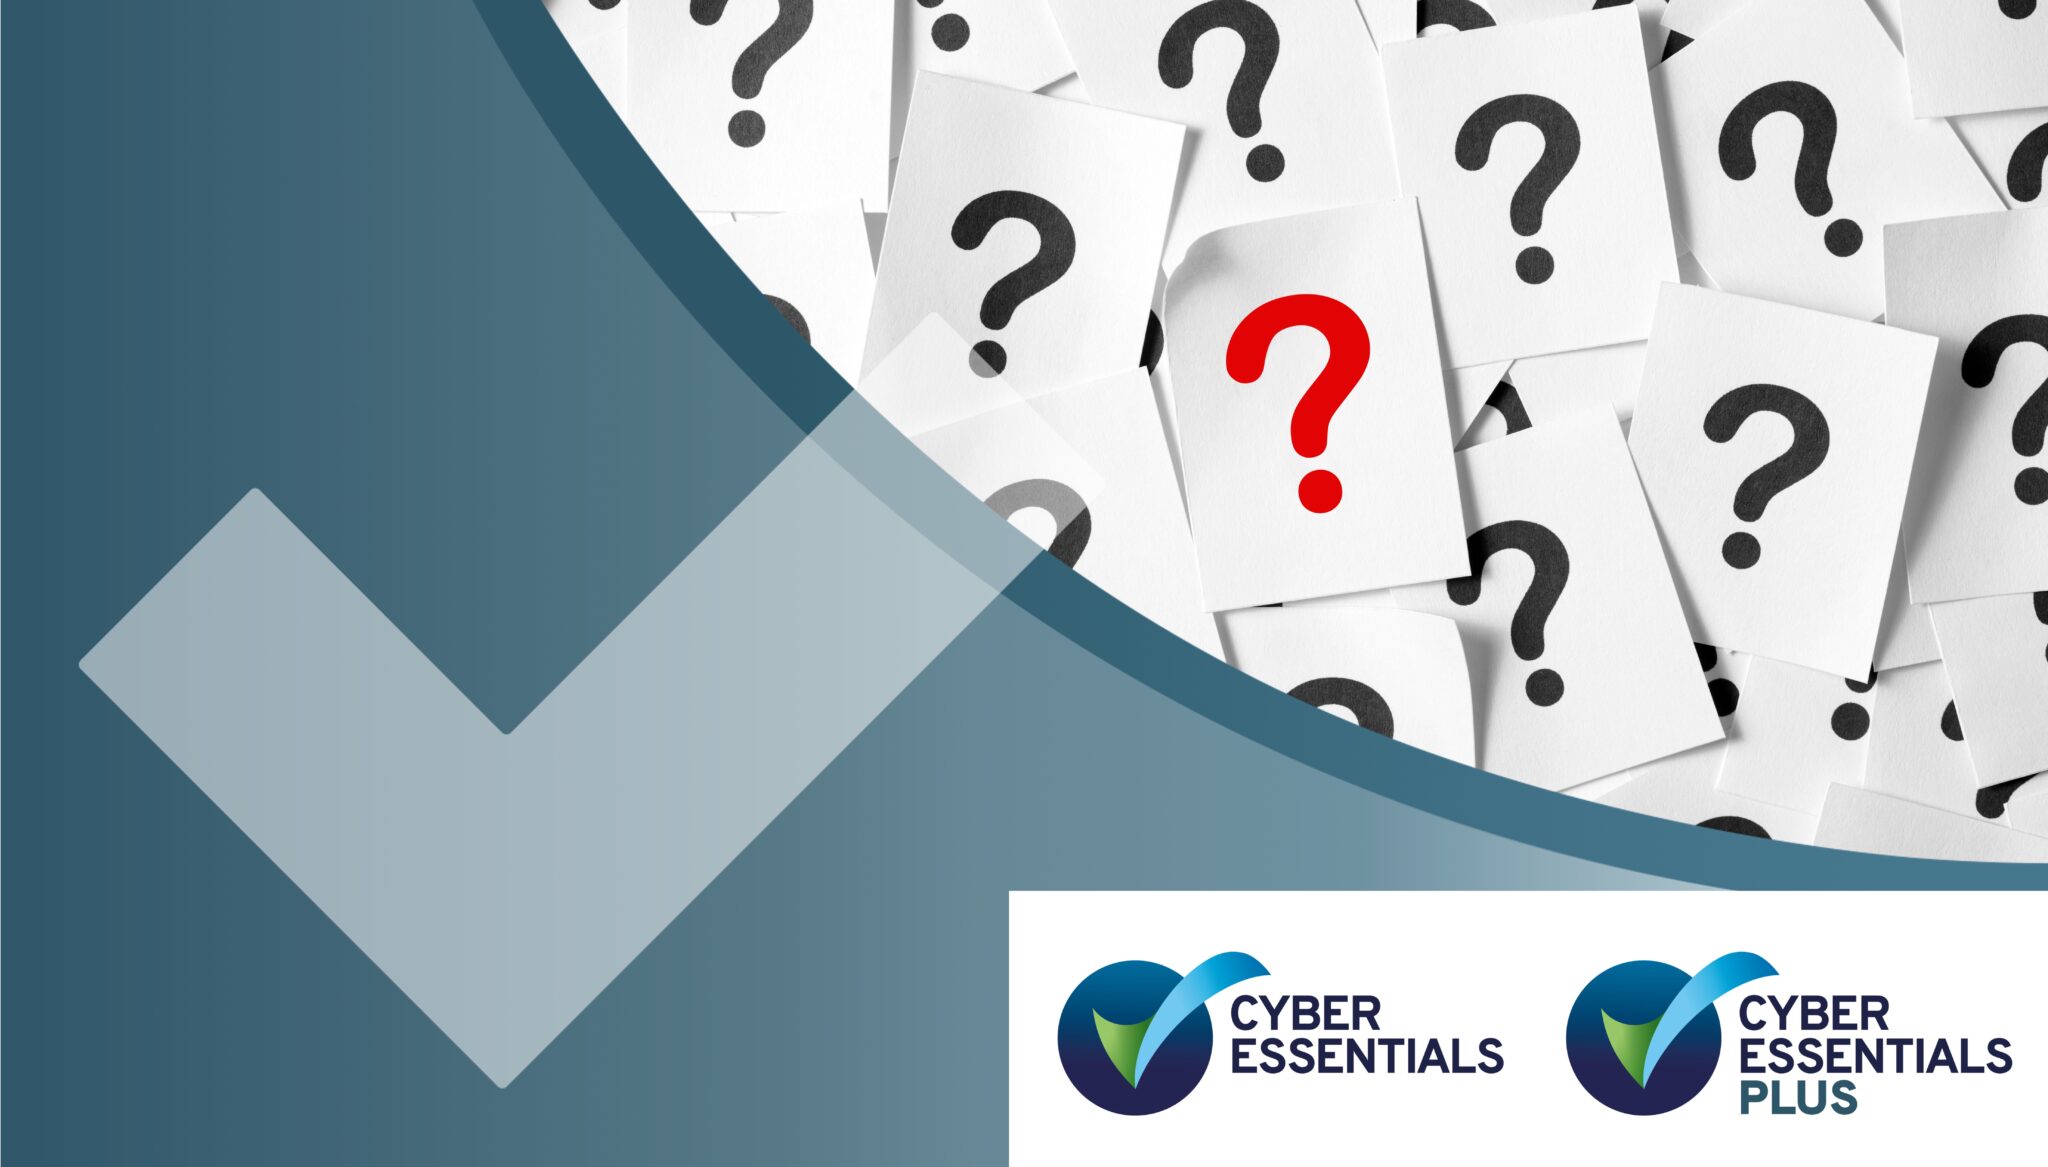 Cyber Essentials and Cyber Essentials Plus – what is the difference?